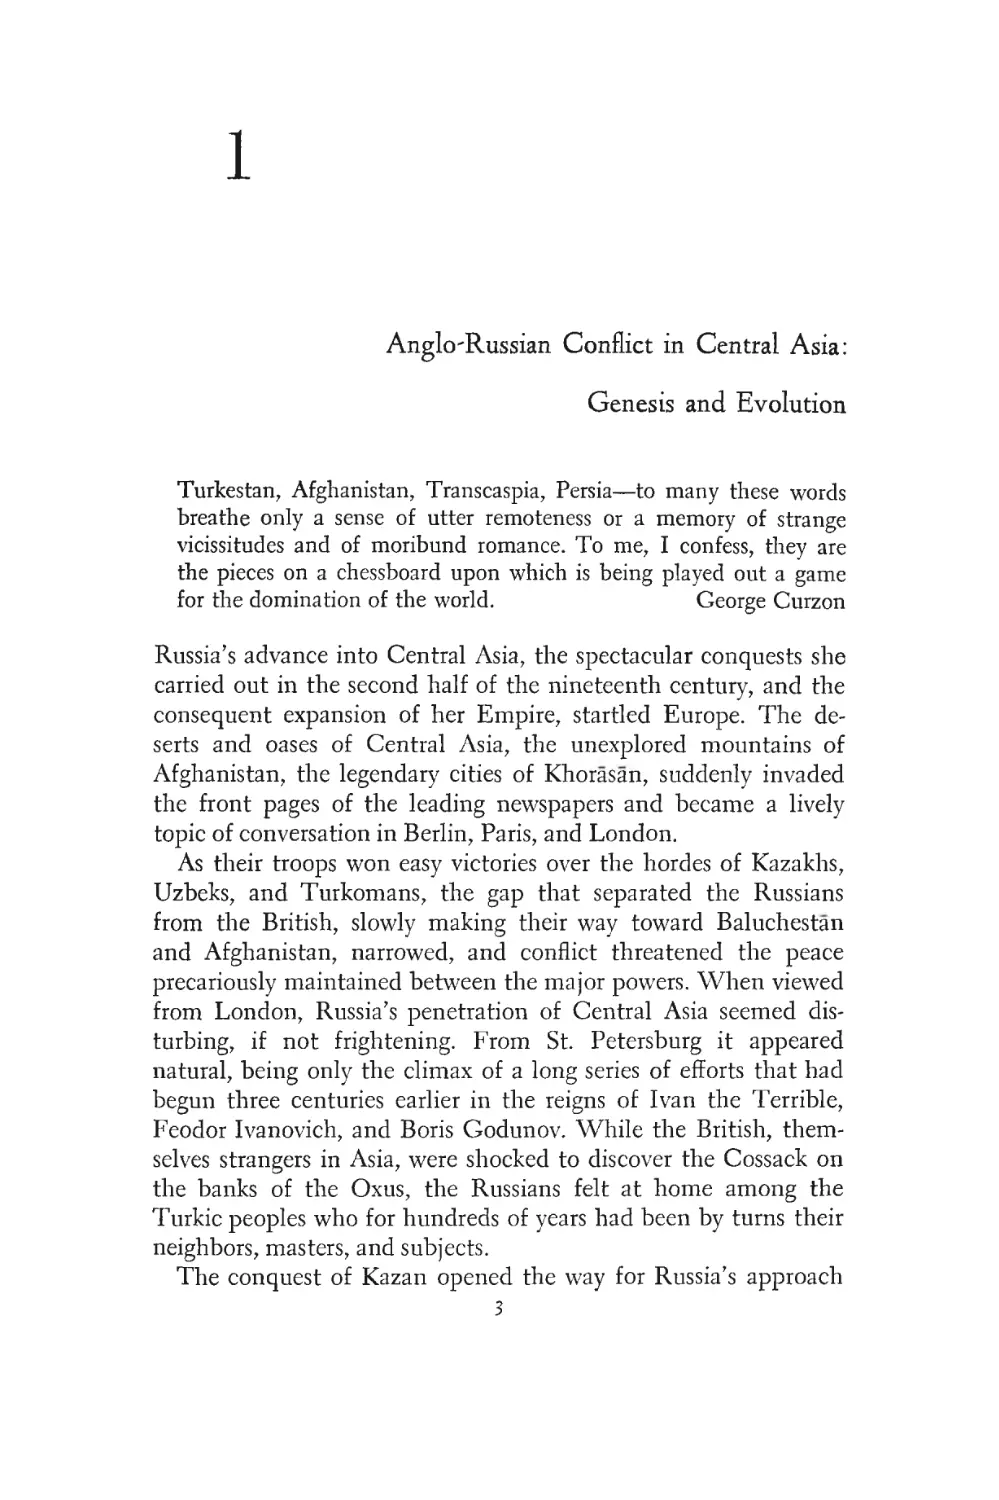 1. Angler Russian Conflict in Central Asia